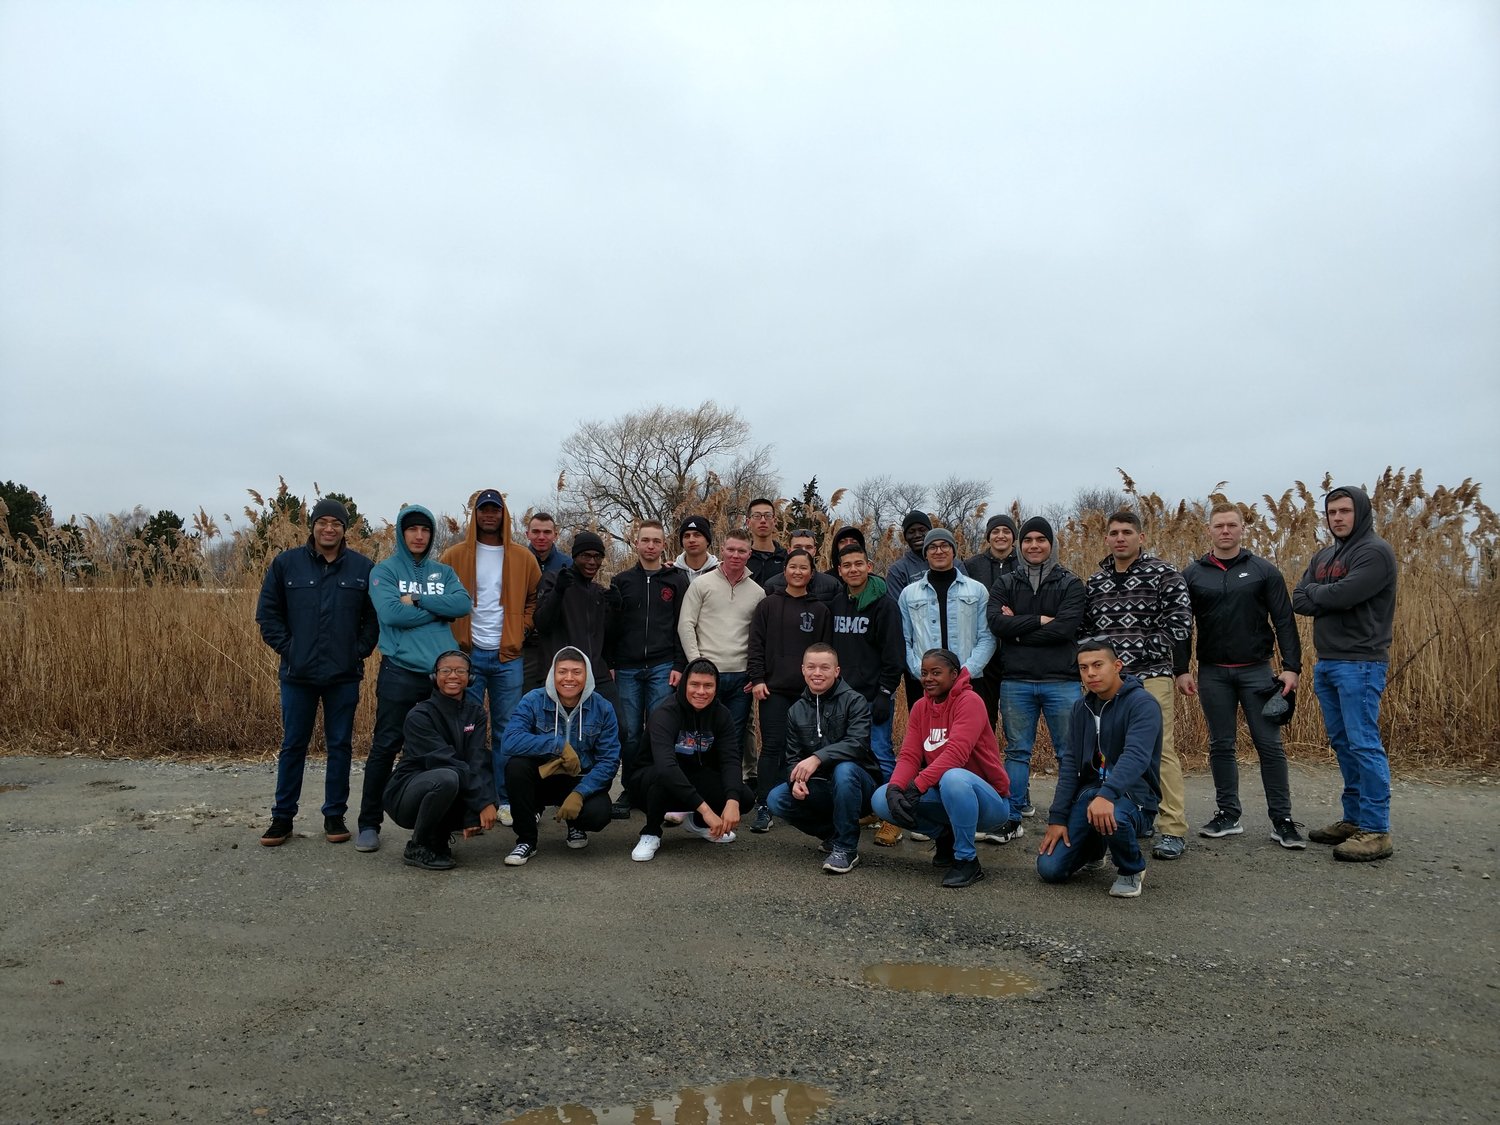 More than two dozen students from the Newport Navy Academy volunteered at the cleanup.